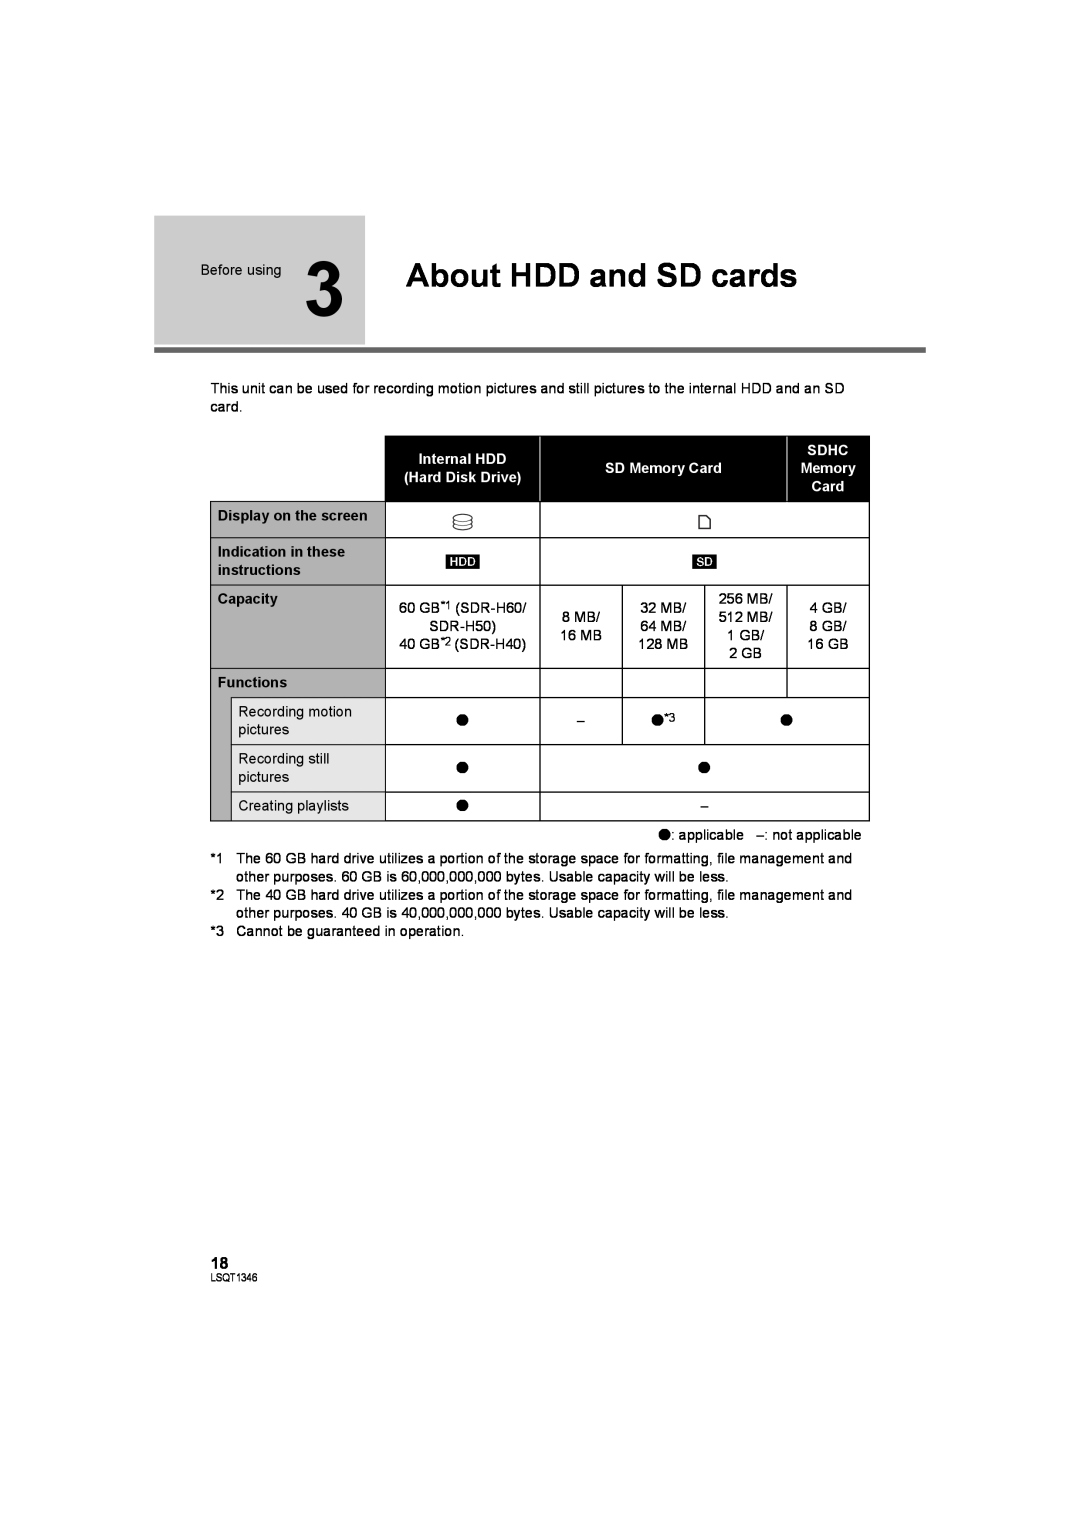 Panasonic SDR-H50 Before using 3 About HDD and SD cards, Internal HDD, SD Memory Card, Sdhc, Display on the screen 